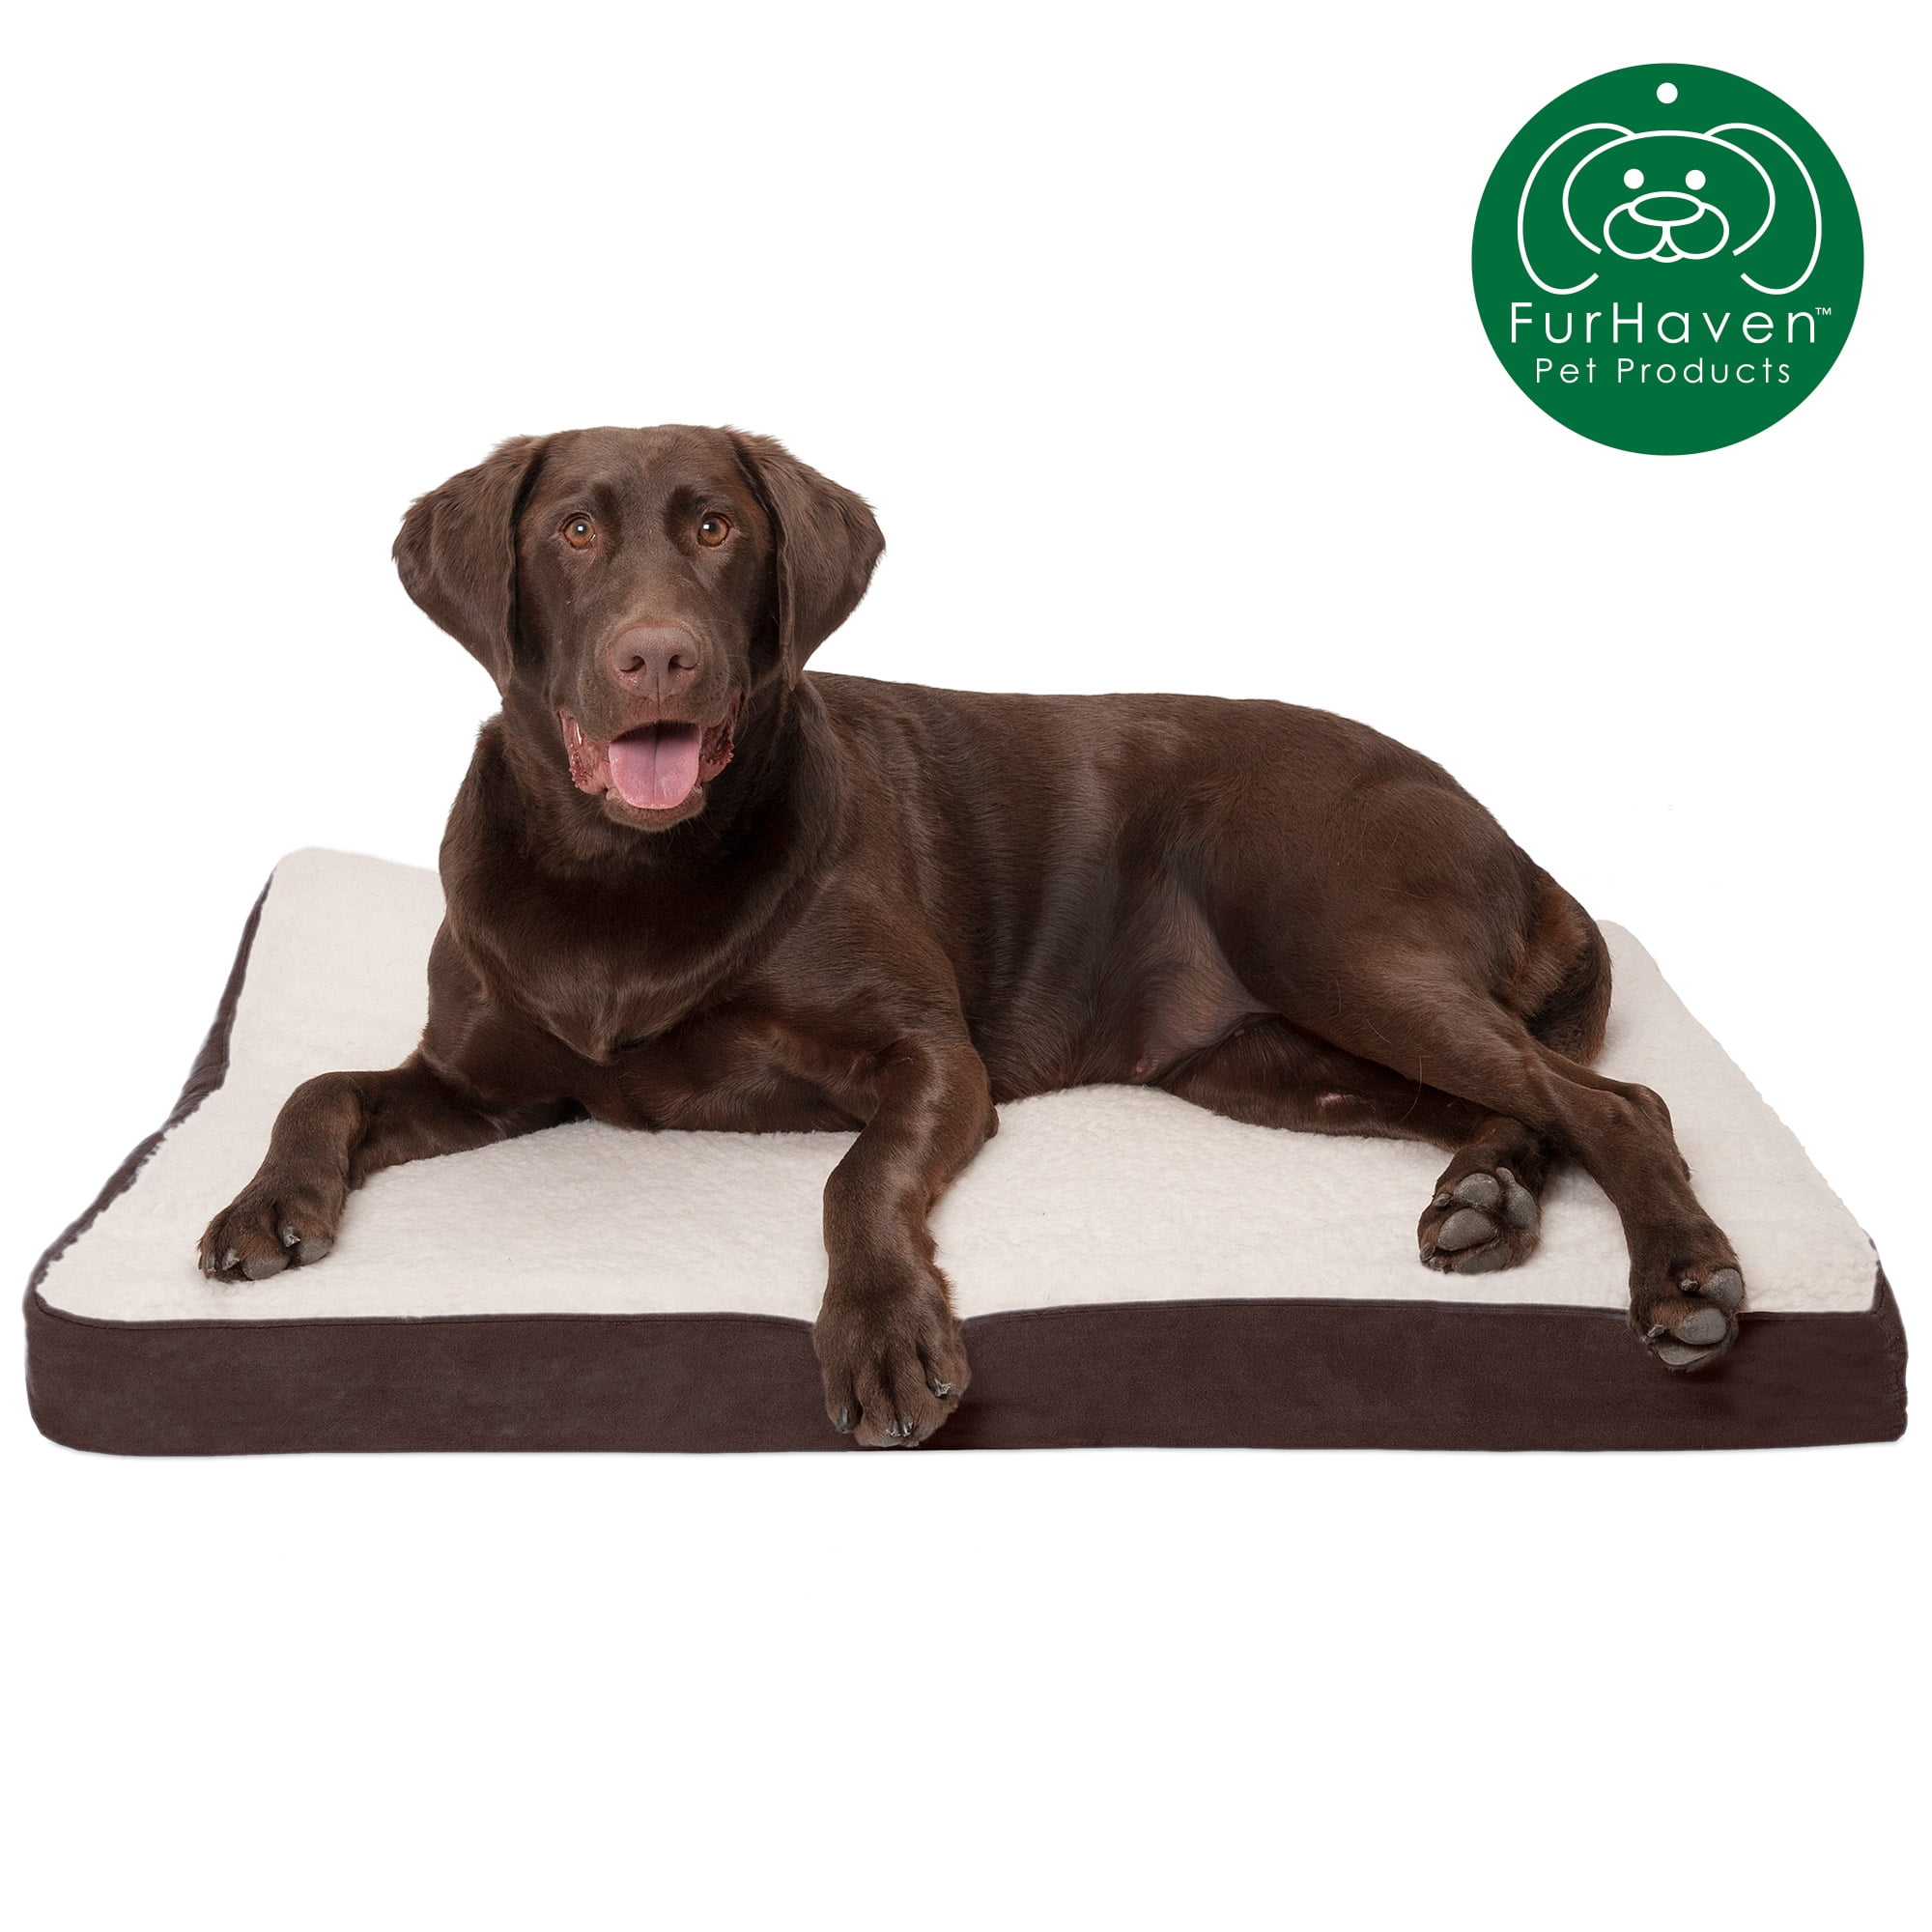 FurHaven Pet Products | Deluxe Orthopedic Sherpa Pet Bed Mattress for Dogs   Cats, Espresso, Large - Walmart.com